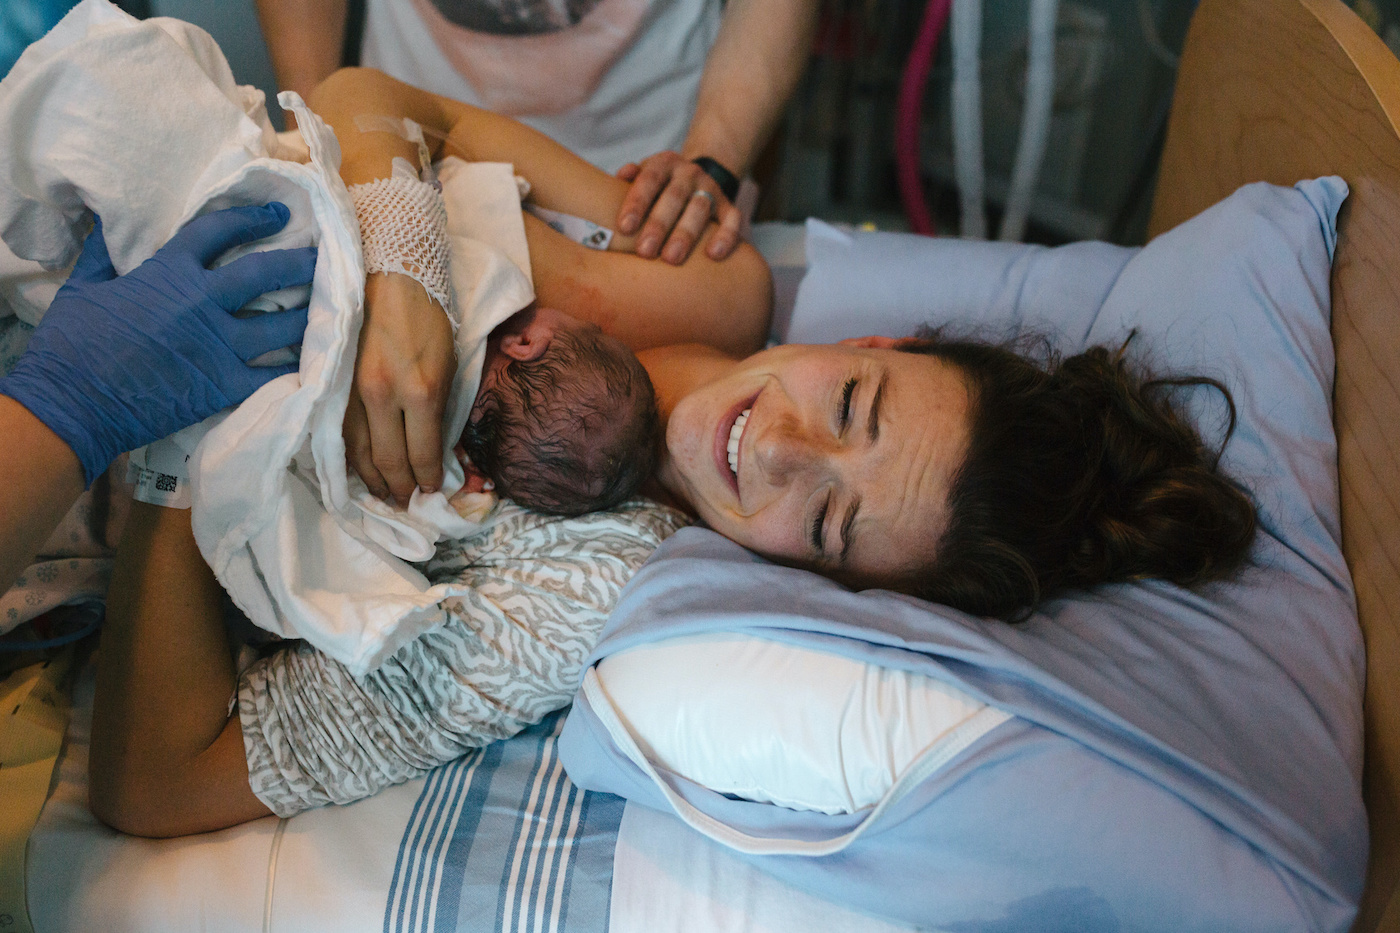 Brand new mother and child after delivery in hospital room